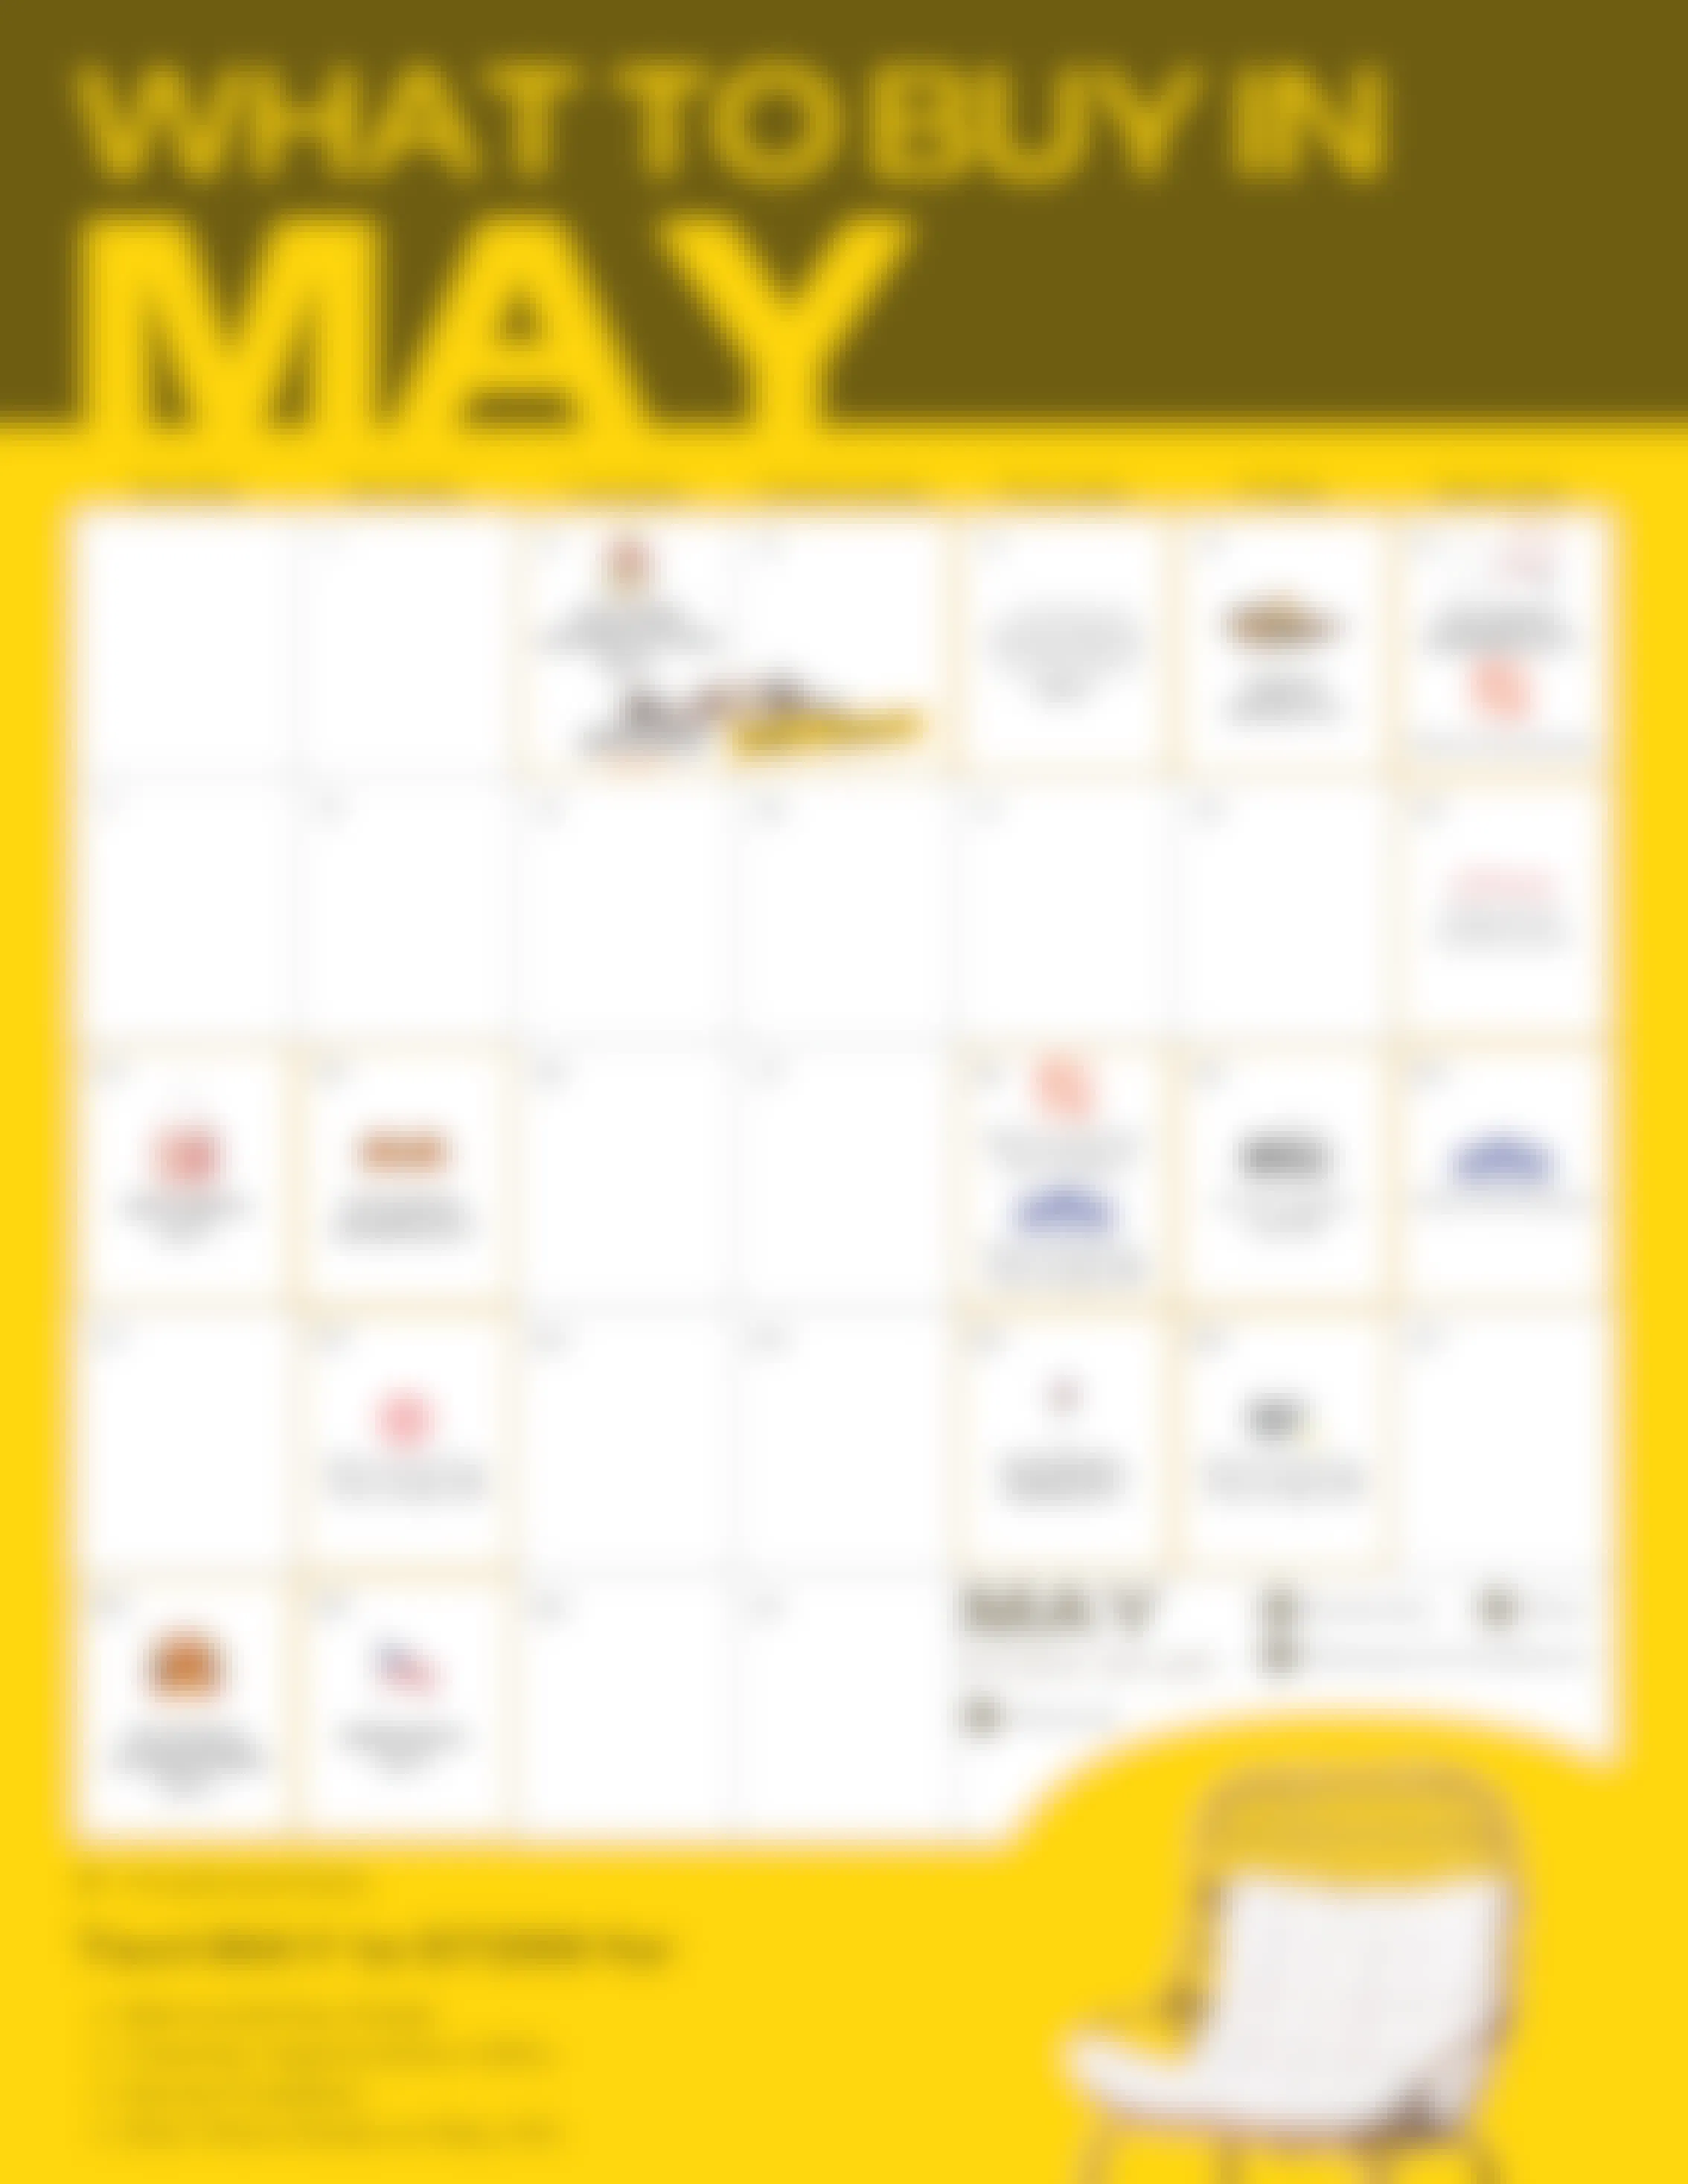 May calendar of sale events